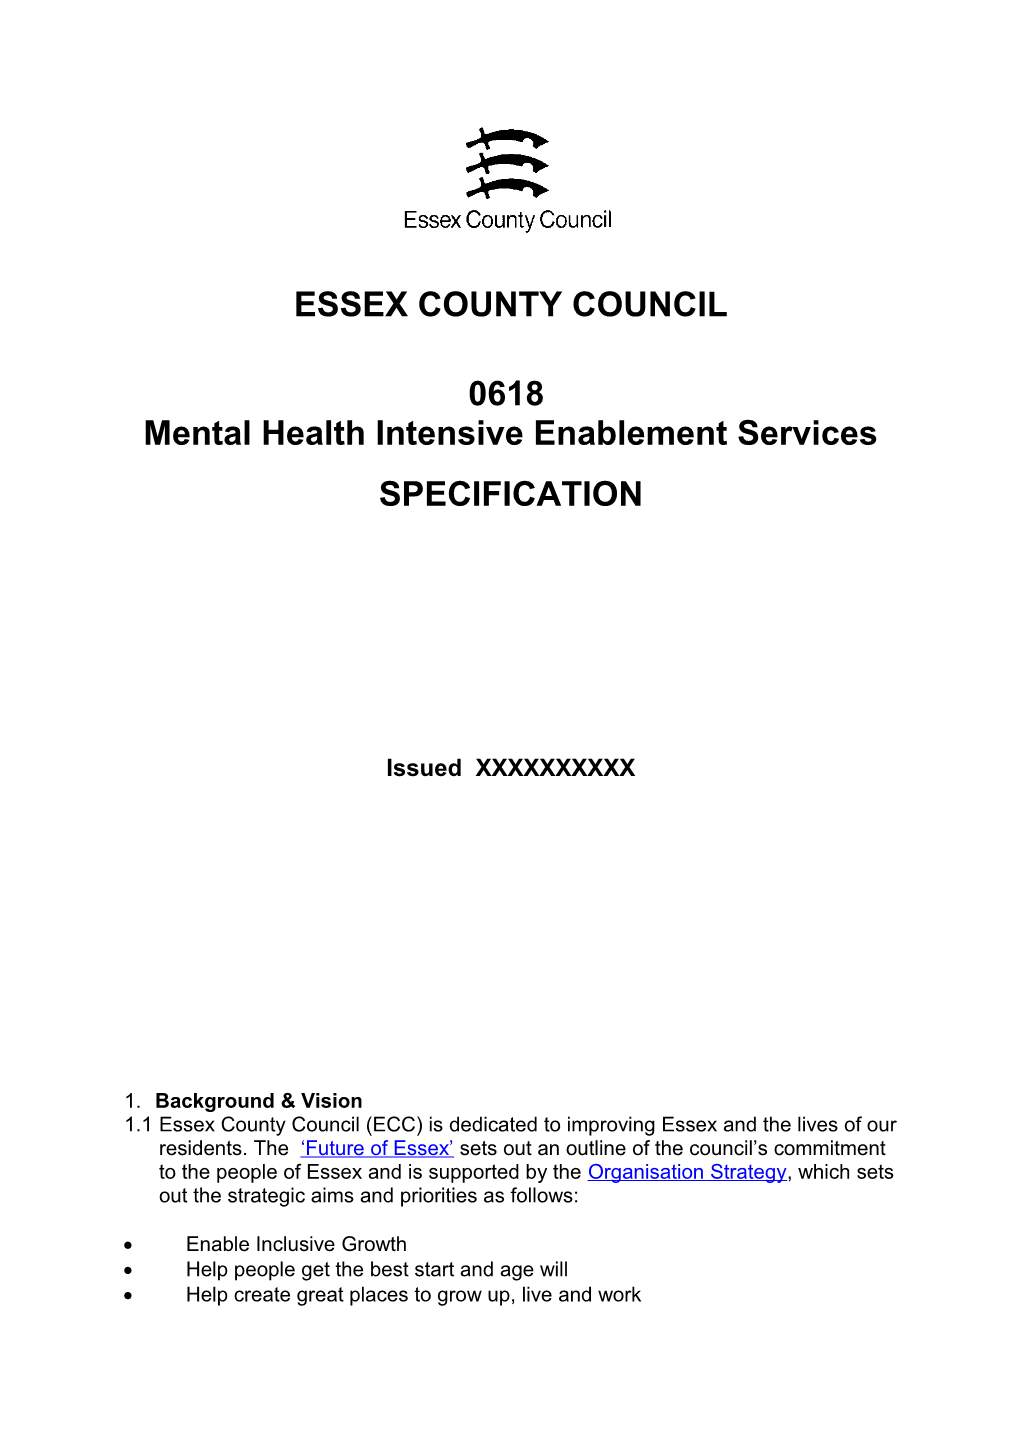 Mental Health Intensive Enablement Services